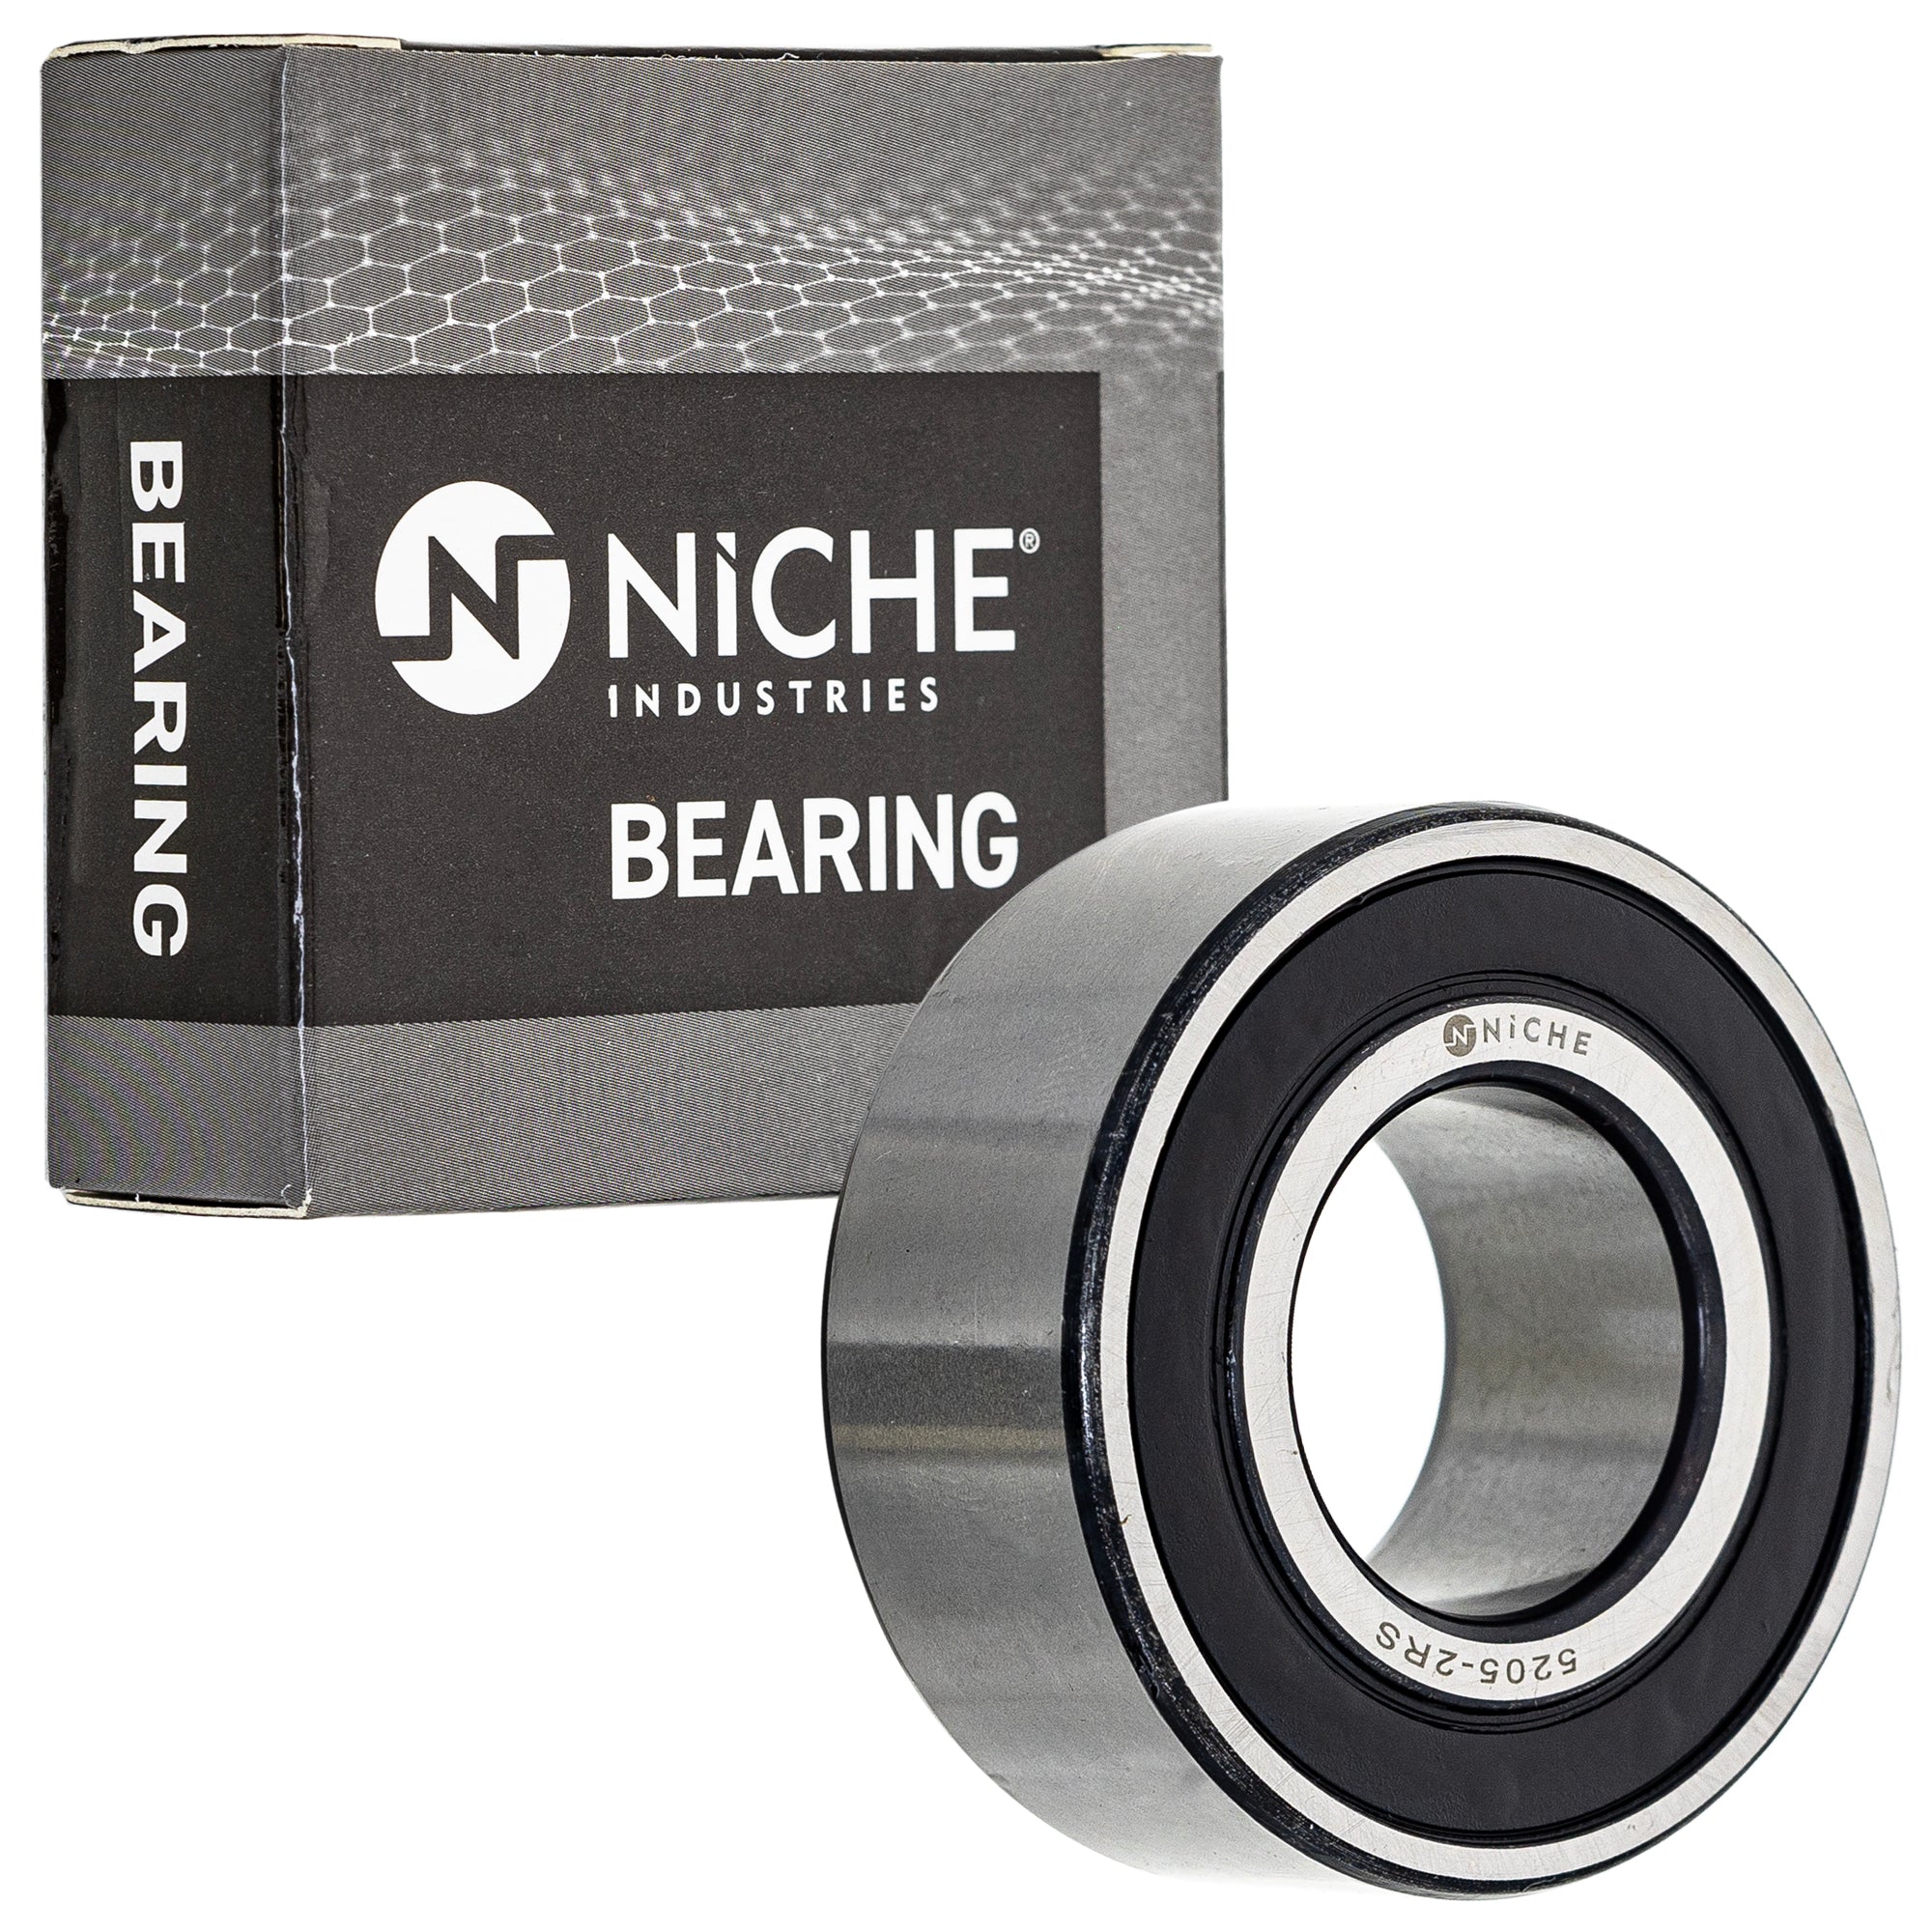 NICHE 519-CBB2279R Bearing 2-Pack for zOTHER K1100RS K1